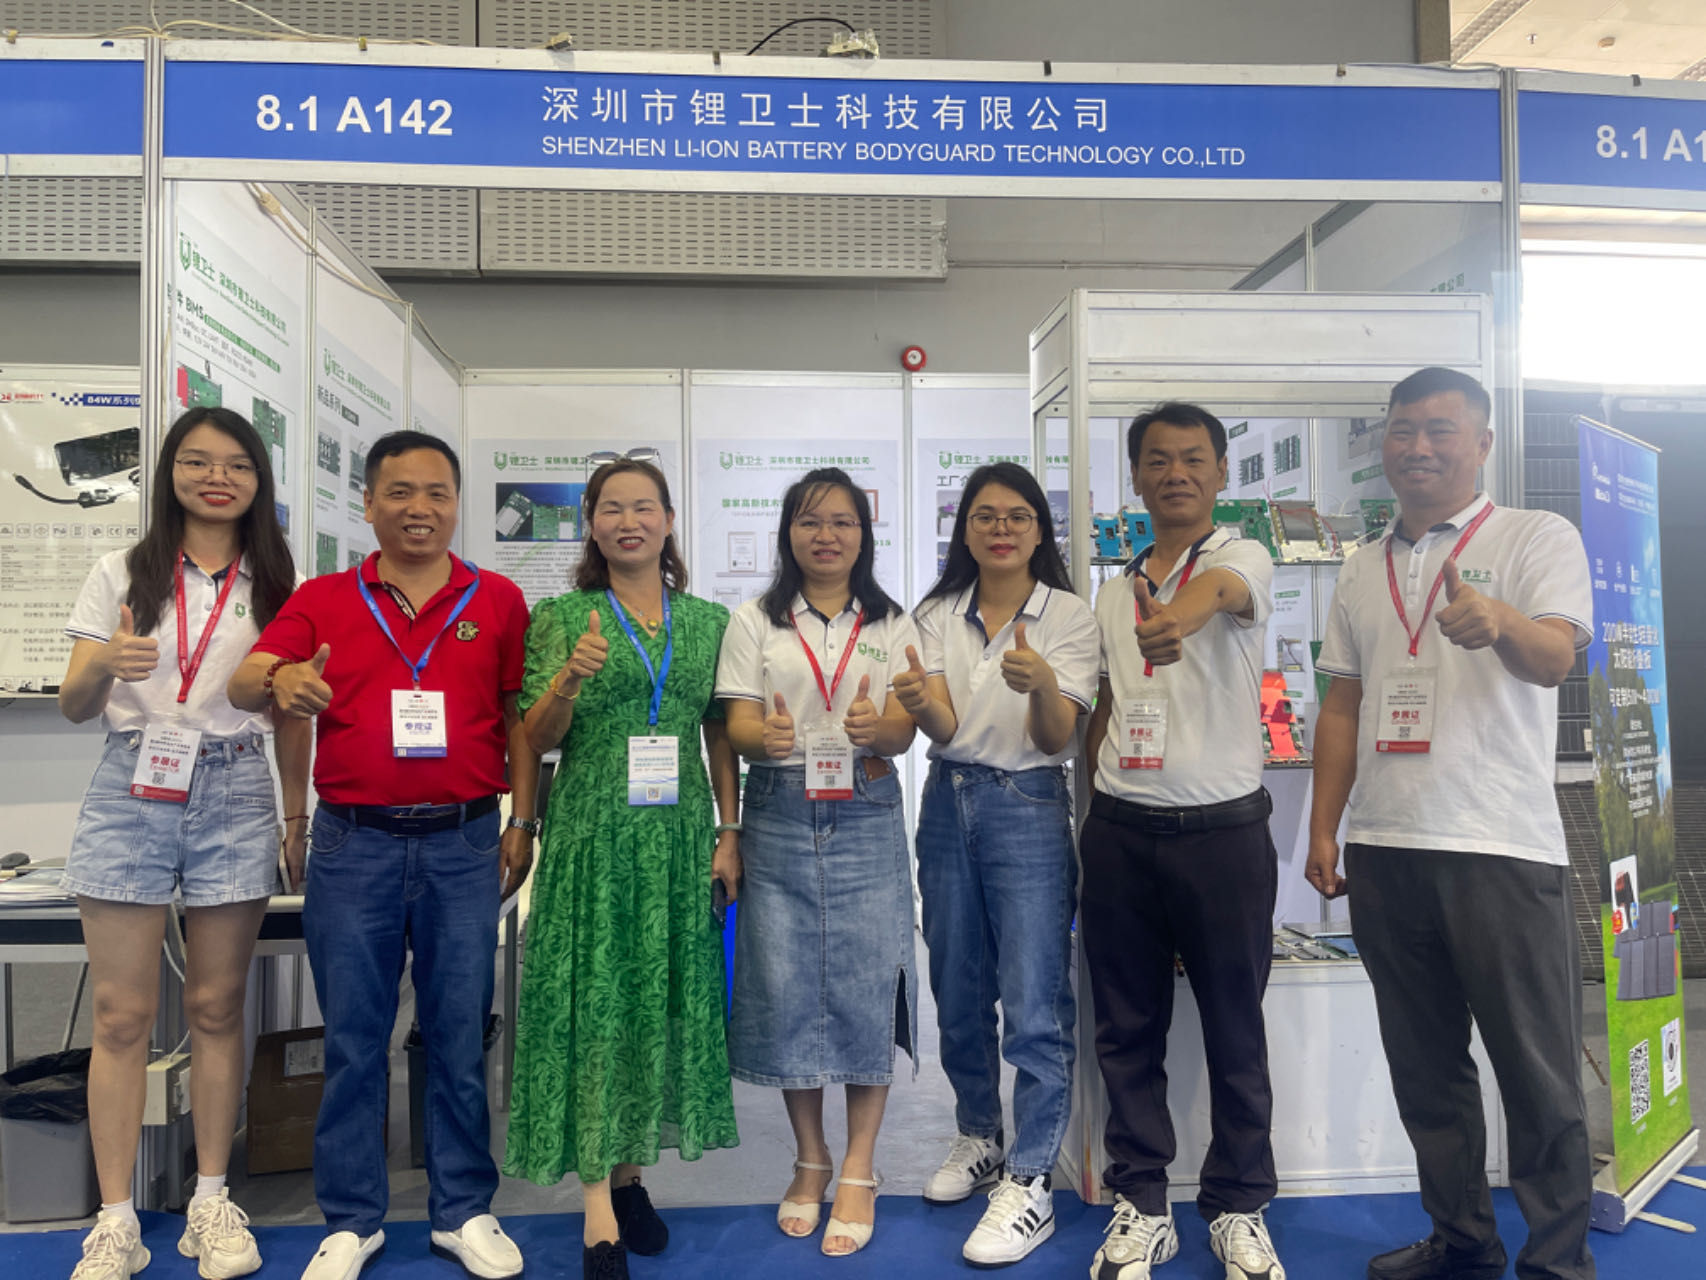 Shenzhen Li-ion Battery Bodyguard Technology Co., Ltd. participated in the World Battery Industry Expo/the 8th Asia-Pacific Battery Exhibition/Asia-Pacific Energy Storage Exhibition